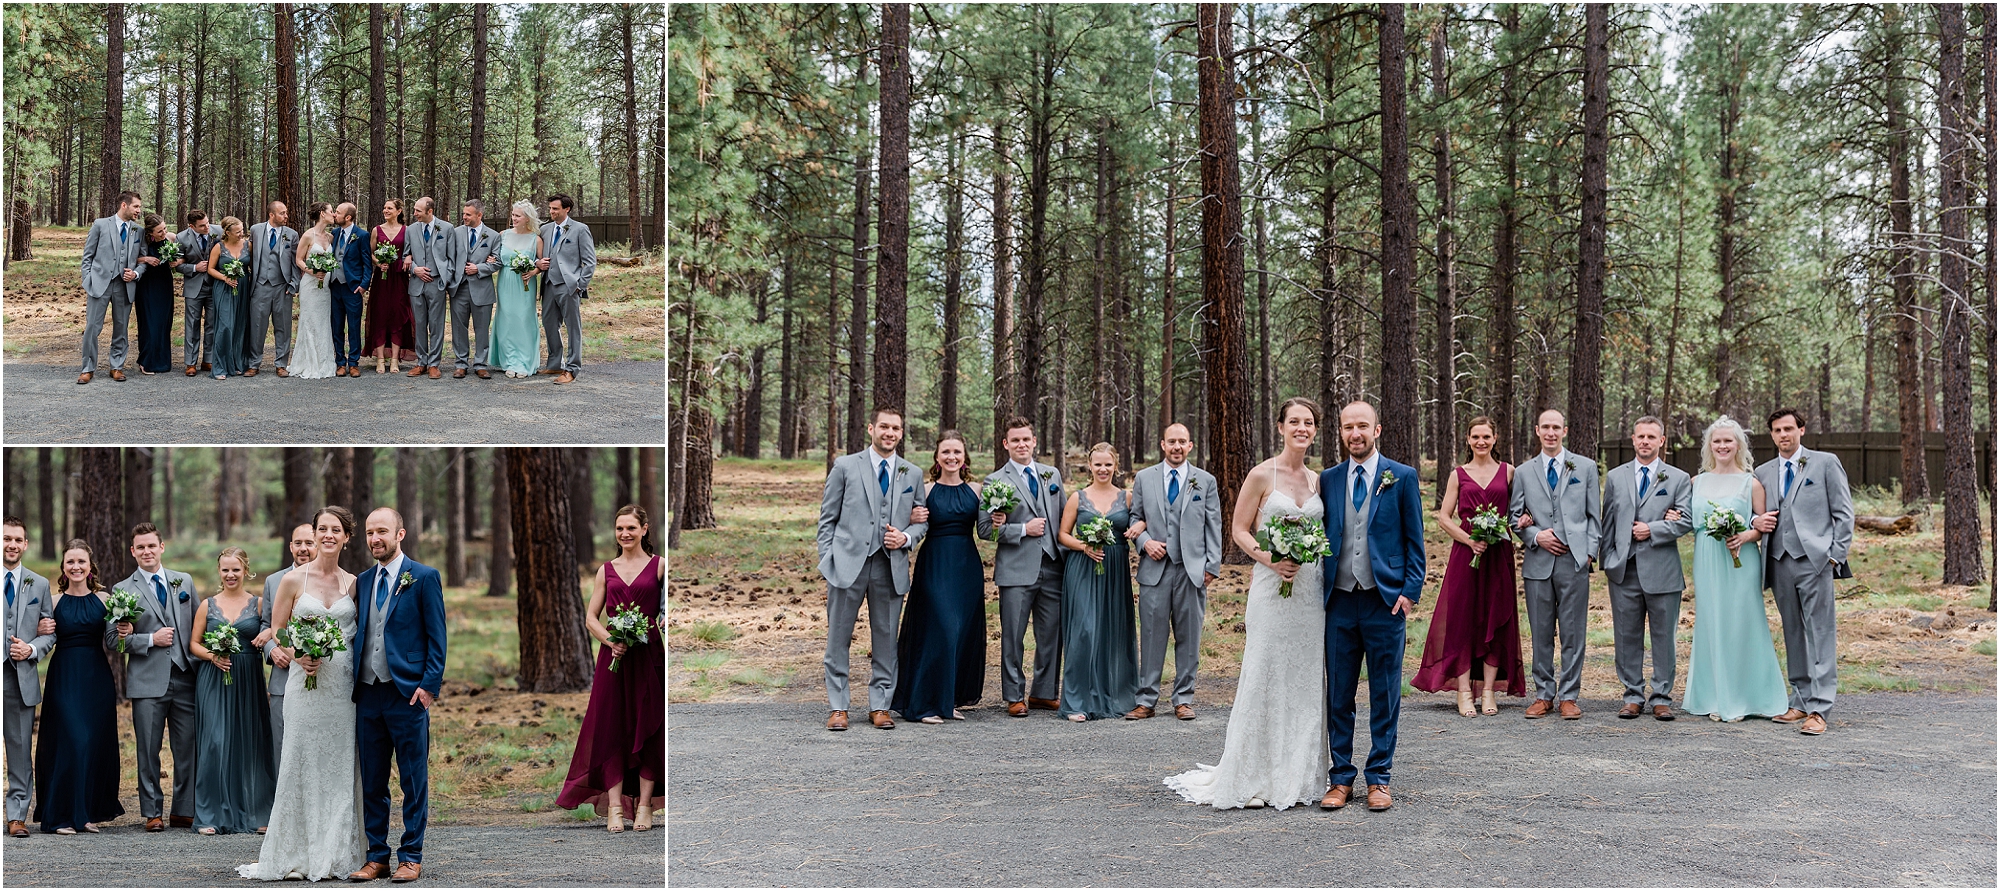 Formal wedding party portraits with the bride and groom outside among the tall pine trees surrounding the High Desert Museum wedding venue in Central Oregon. | Erica Swantek Photography